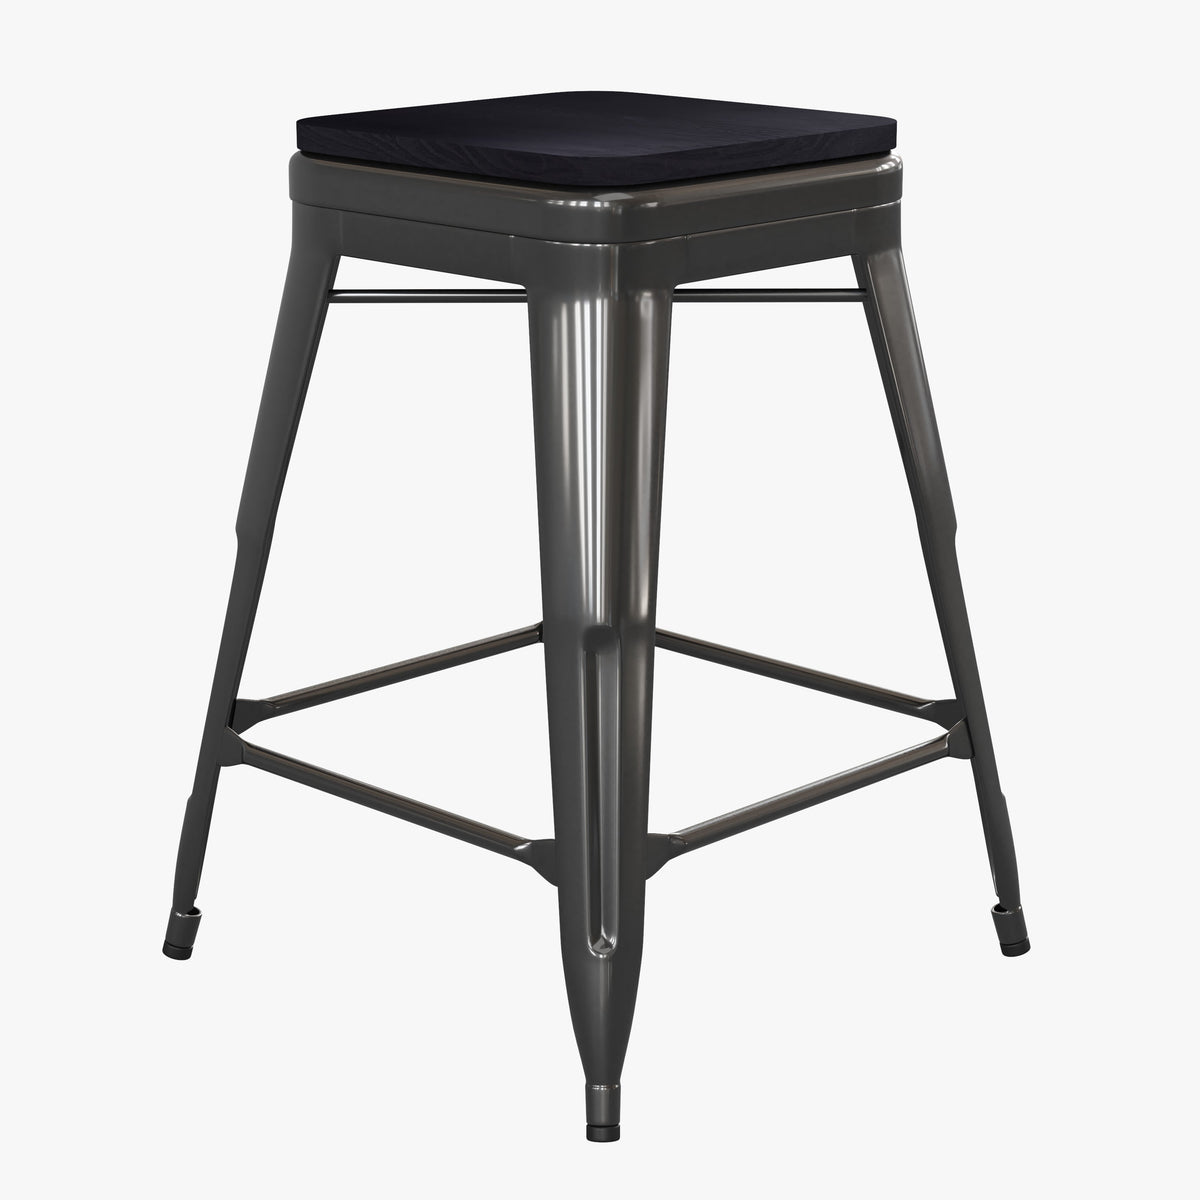 Black/Black |#| Indoor/Outdoor Backless Counter Stool with Poly Seat - Black/Black